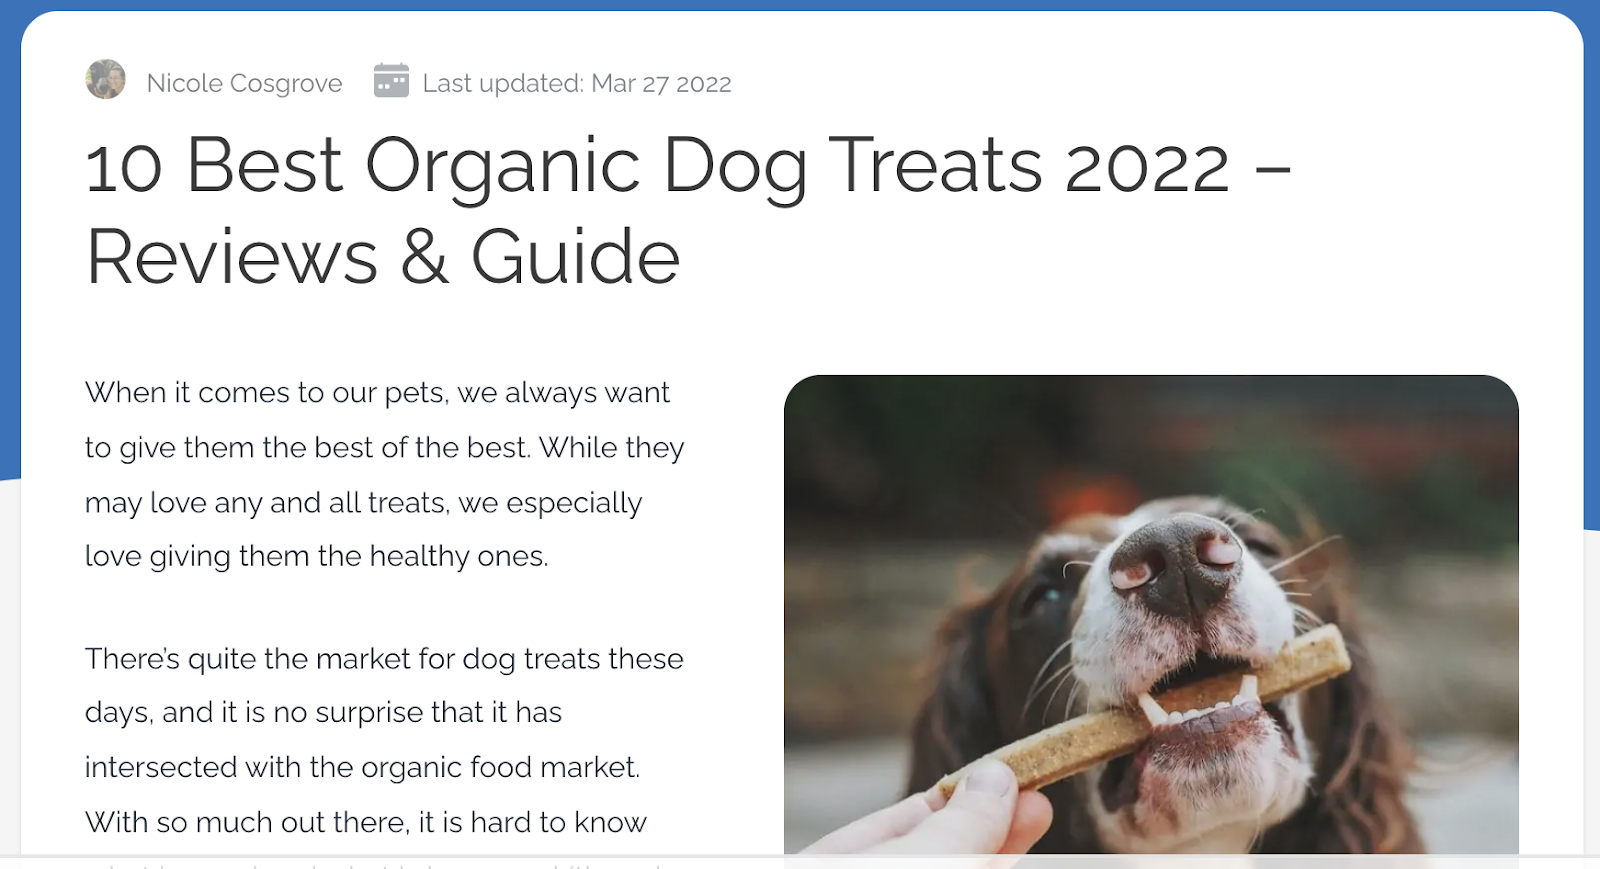 A blog page with the title that reads "10 Best Organic Dog Treats 2022 - Reviews & Guide"